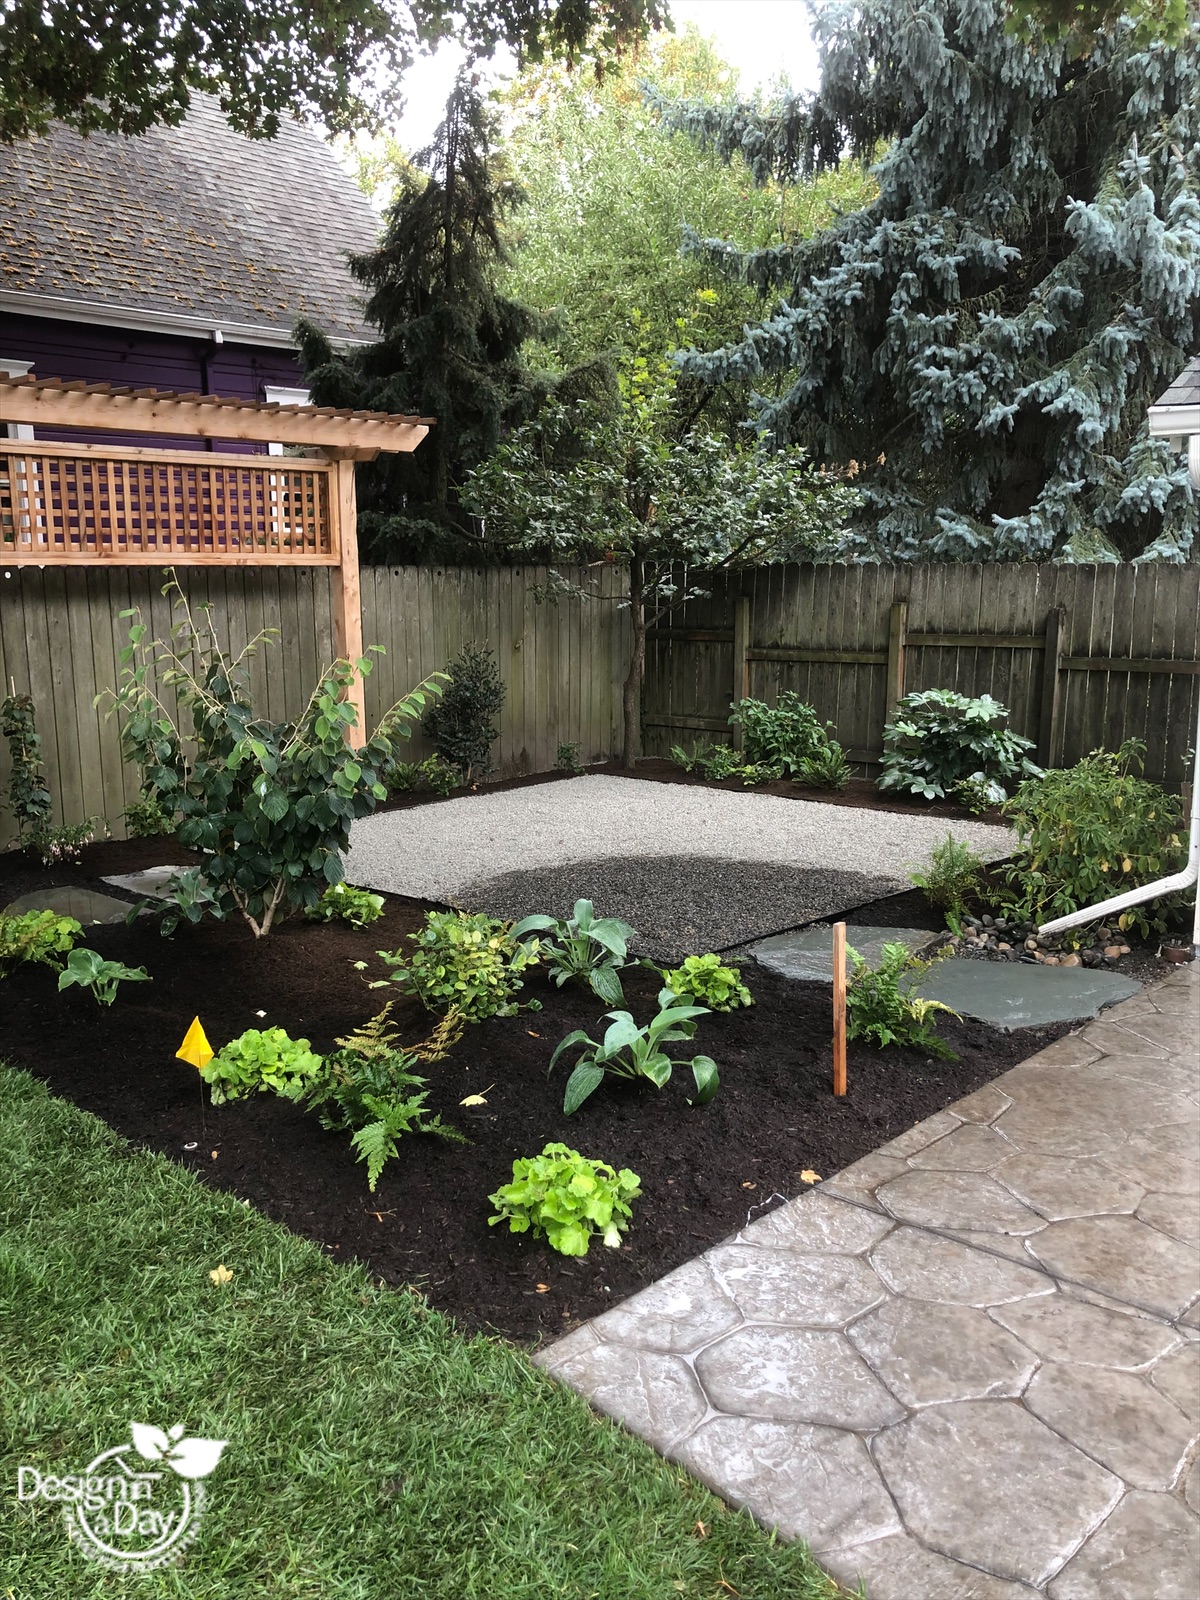 2 Patios with privacy screen are loosely connected with flagstone stepping stones in Portland, Oregon.